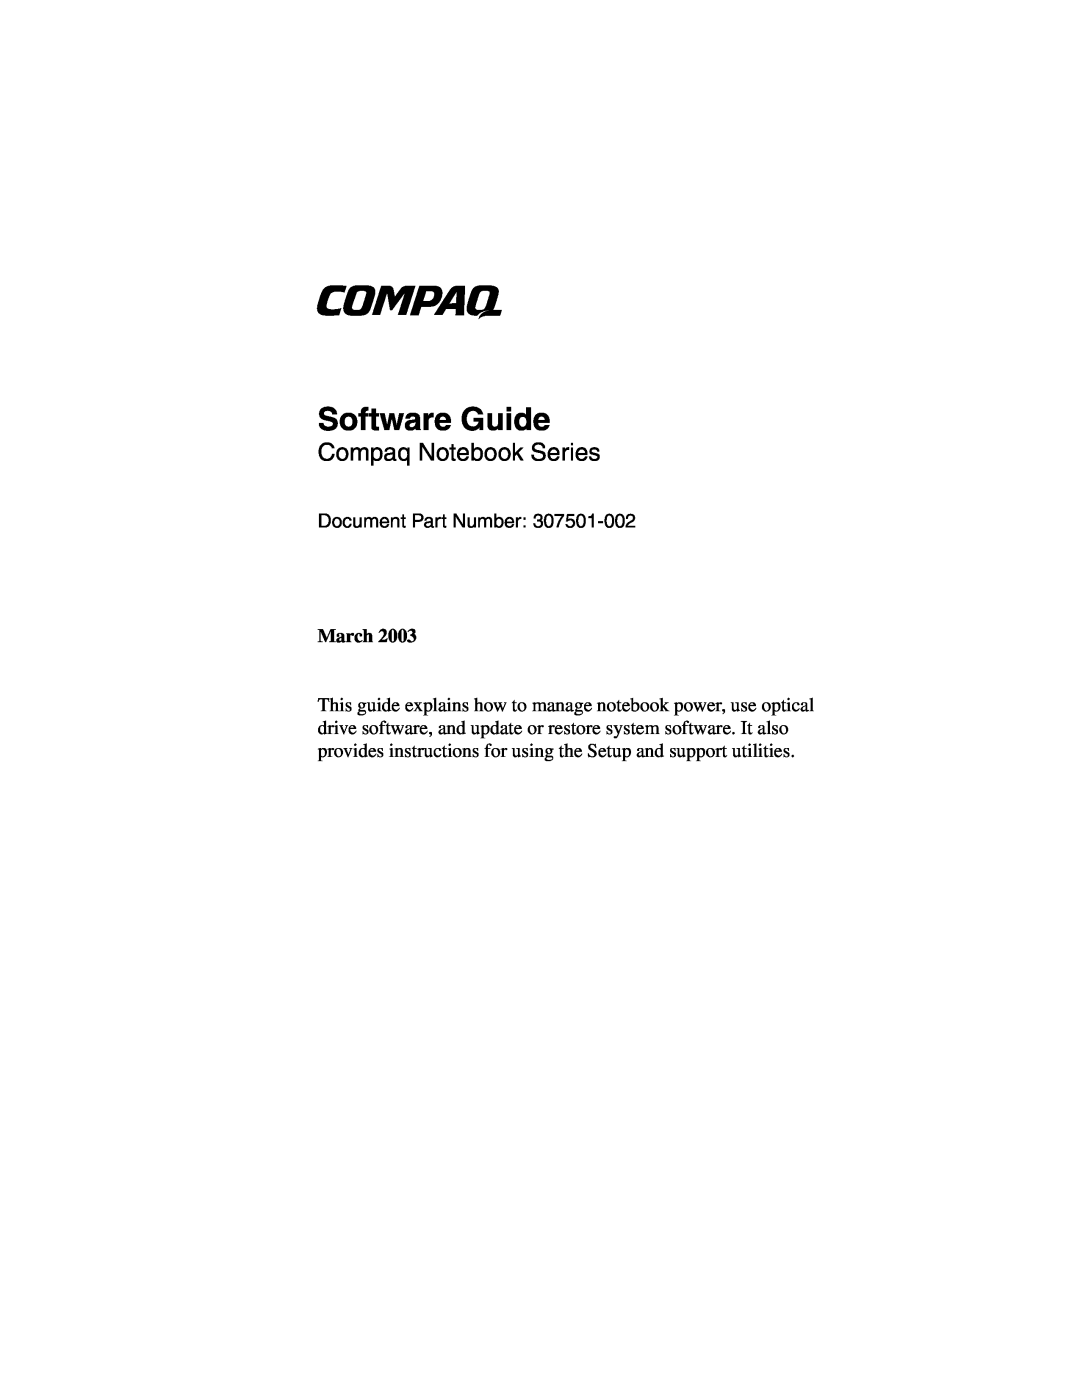 HP 3017CL, 3016US, 3015US, 3018CL, 3015CA, 3005US manual Software Guide, Compaq Notebook Series, Document Part Number, March 